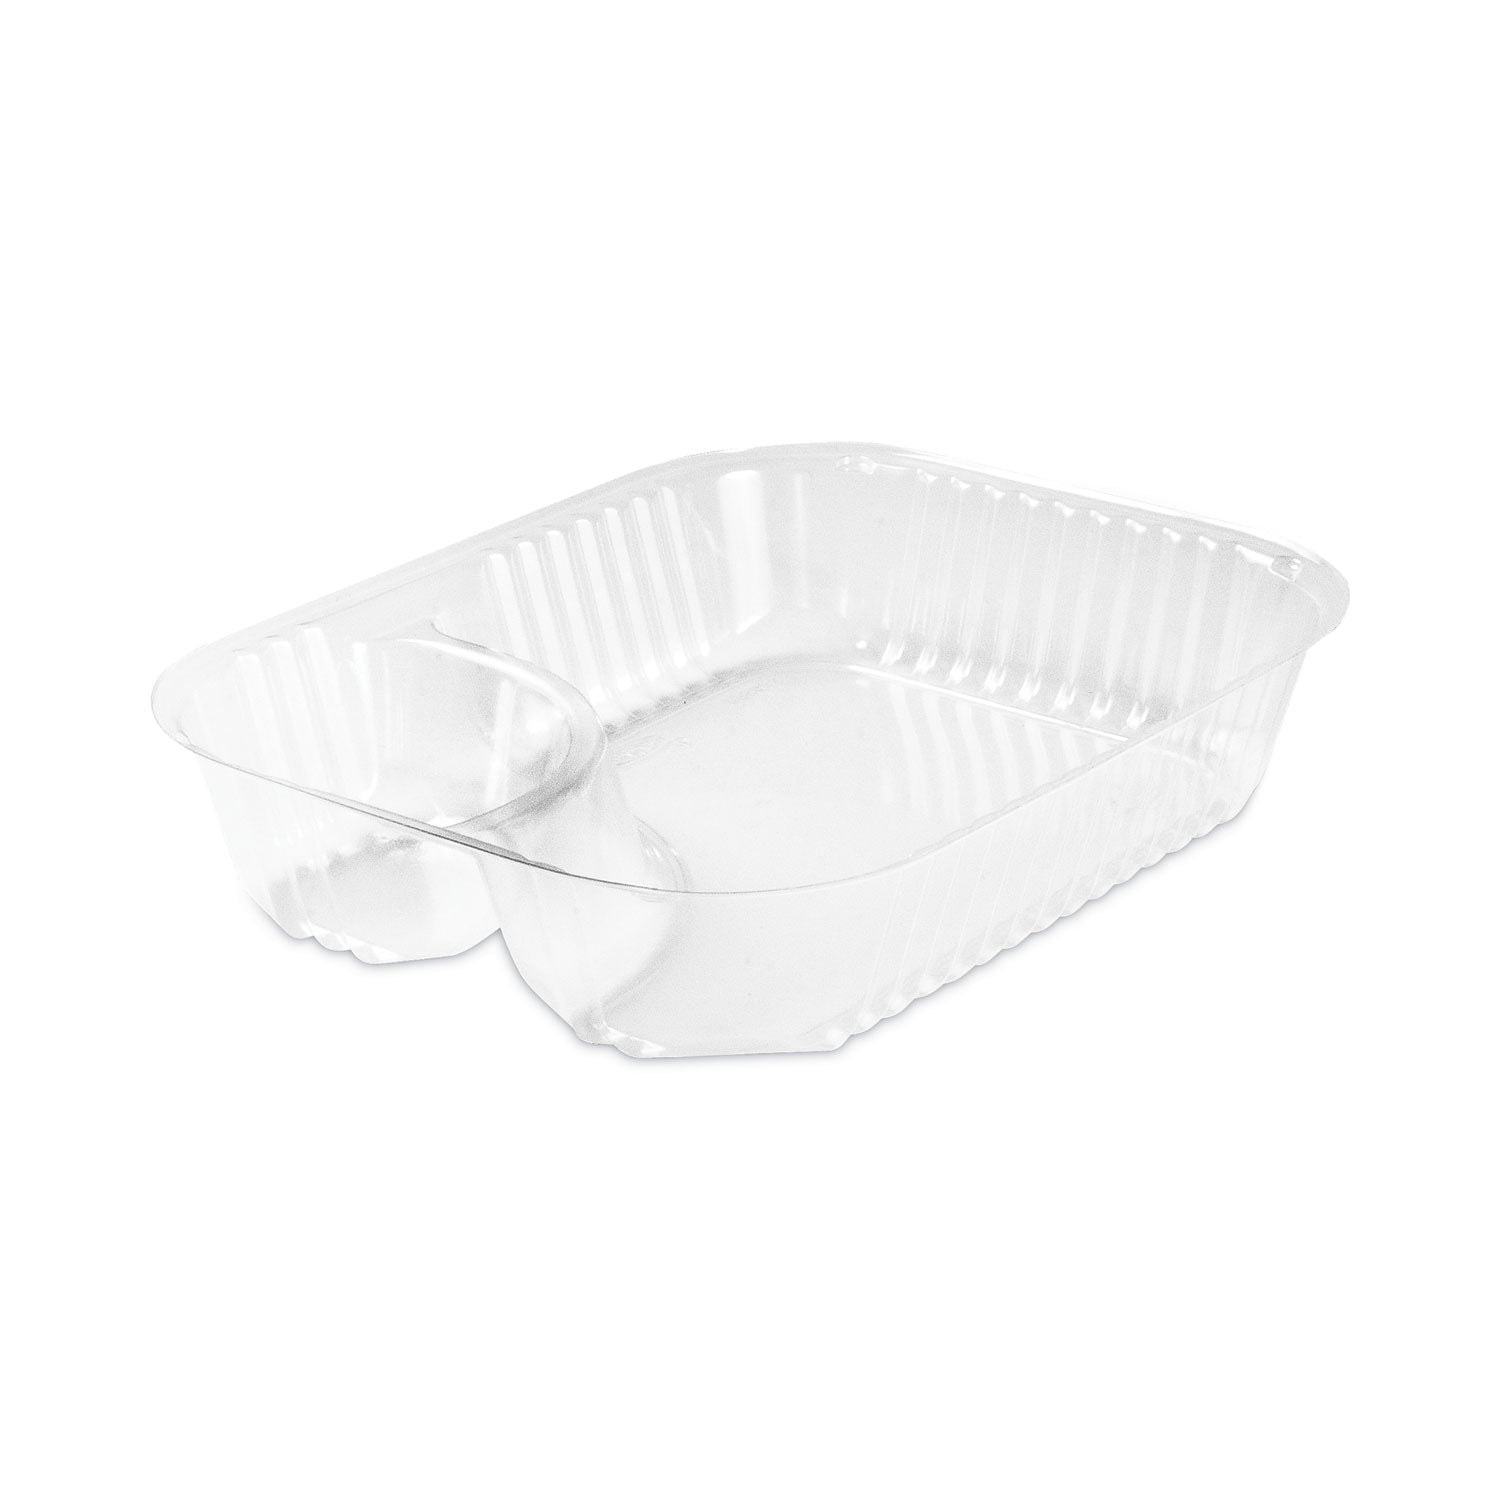 clearpac-large-nacho-tray-2-compartments-33-oz-62-x-62-x-16-clear-plastic-500-carton_dccc68nt2 - 2